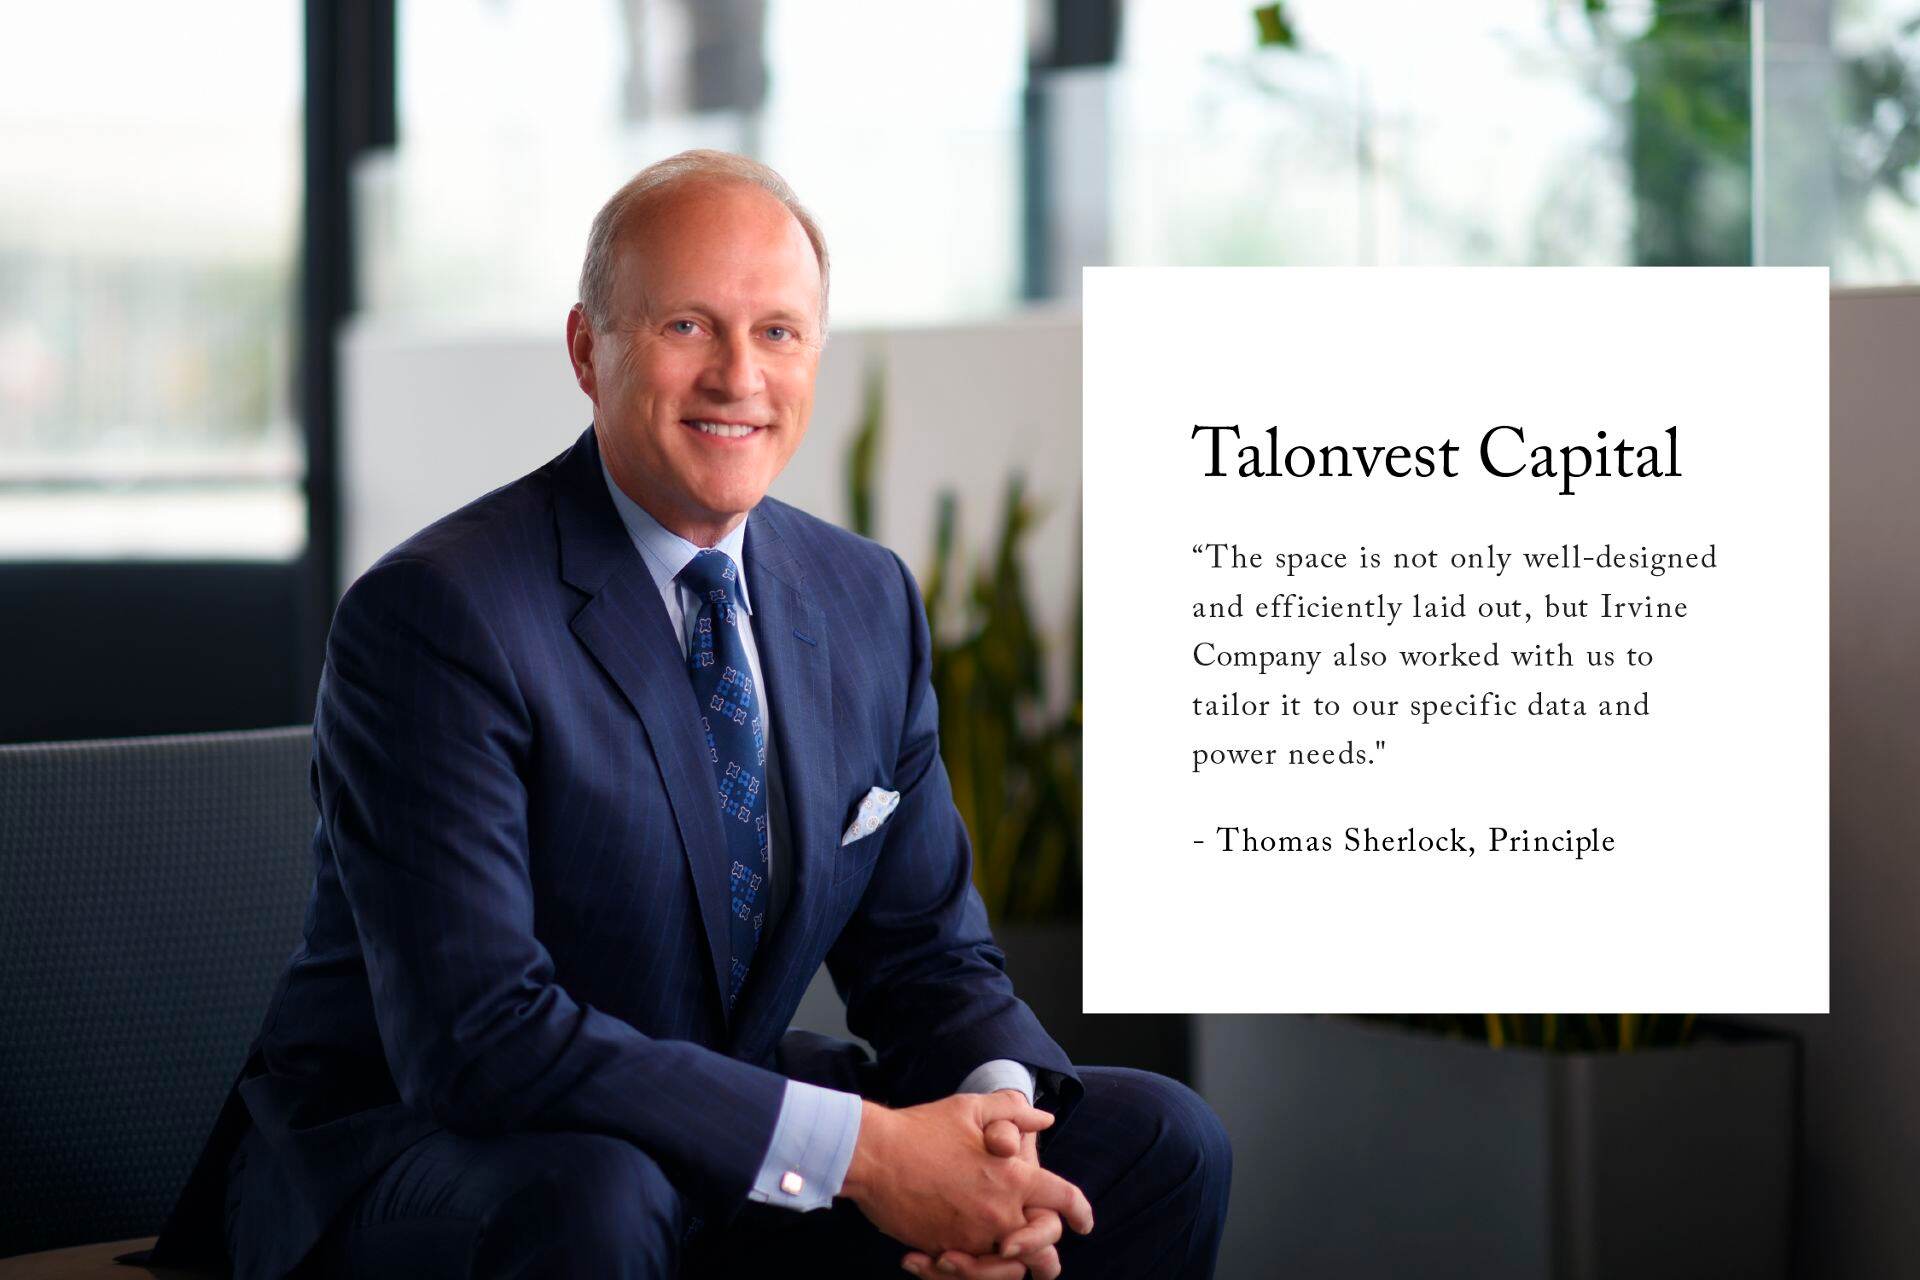 Image of Thomas Sherlock, Principle of Talonvest Capital, featuring a short text testimonial of his experience with Irvine Company.